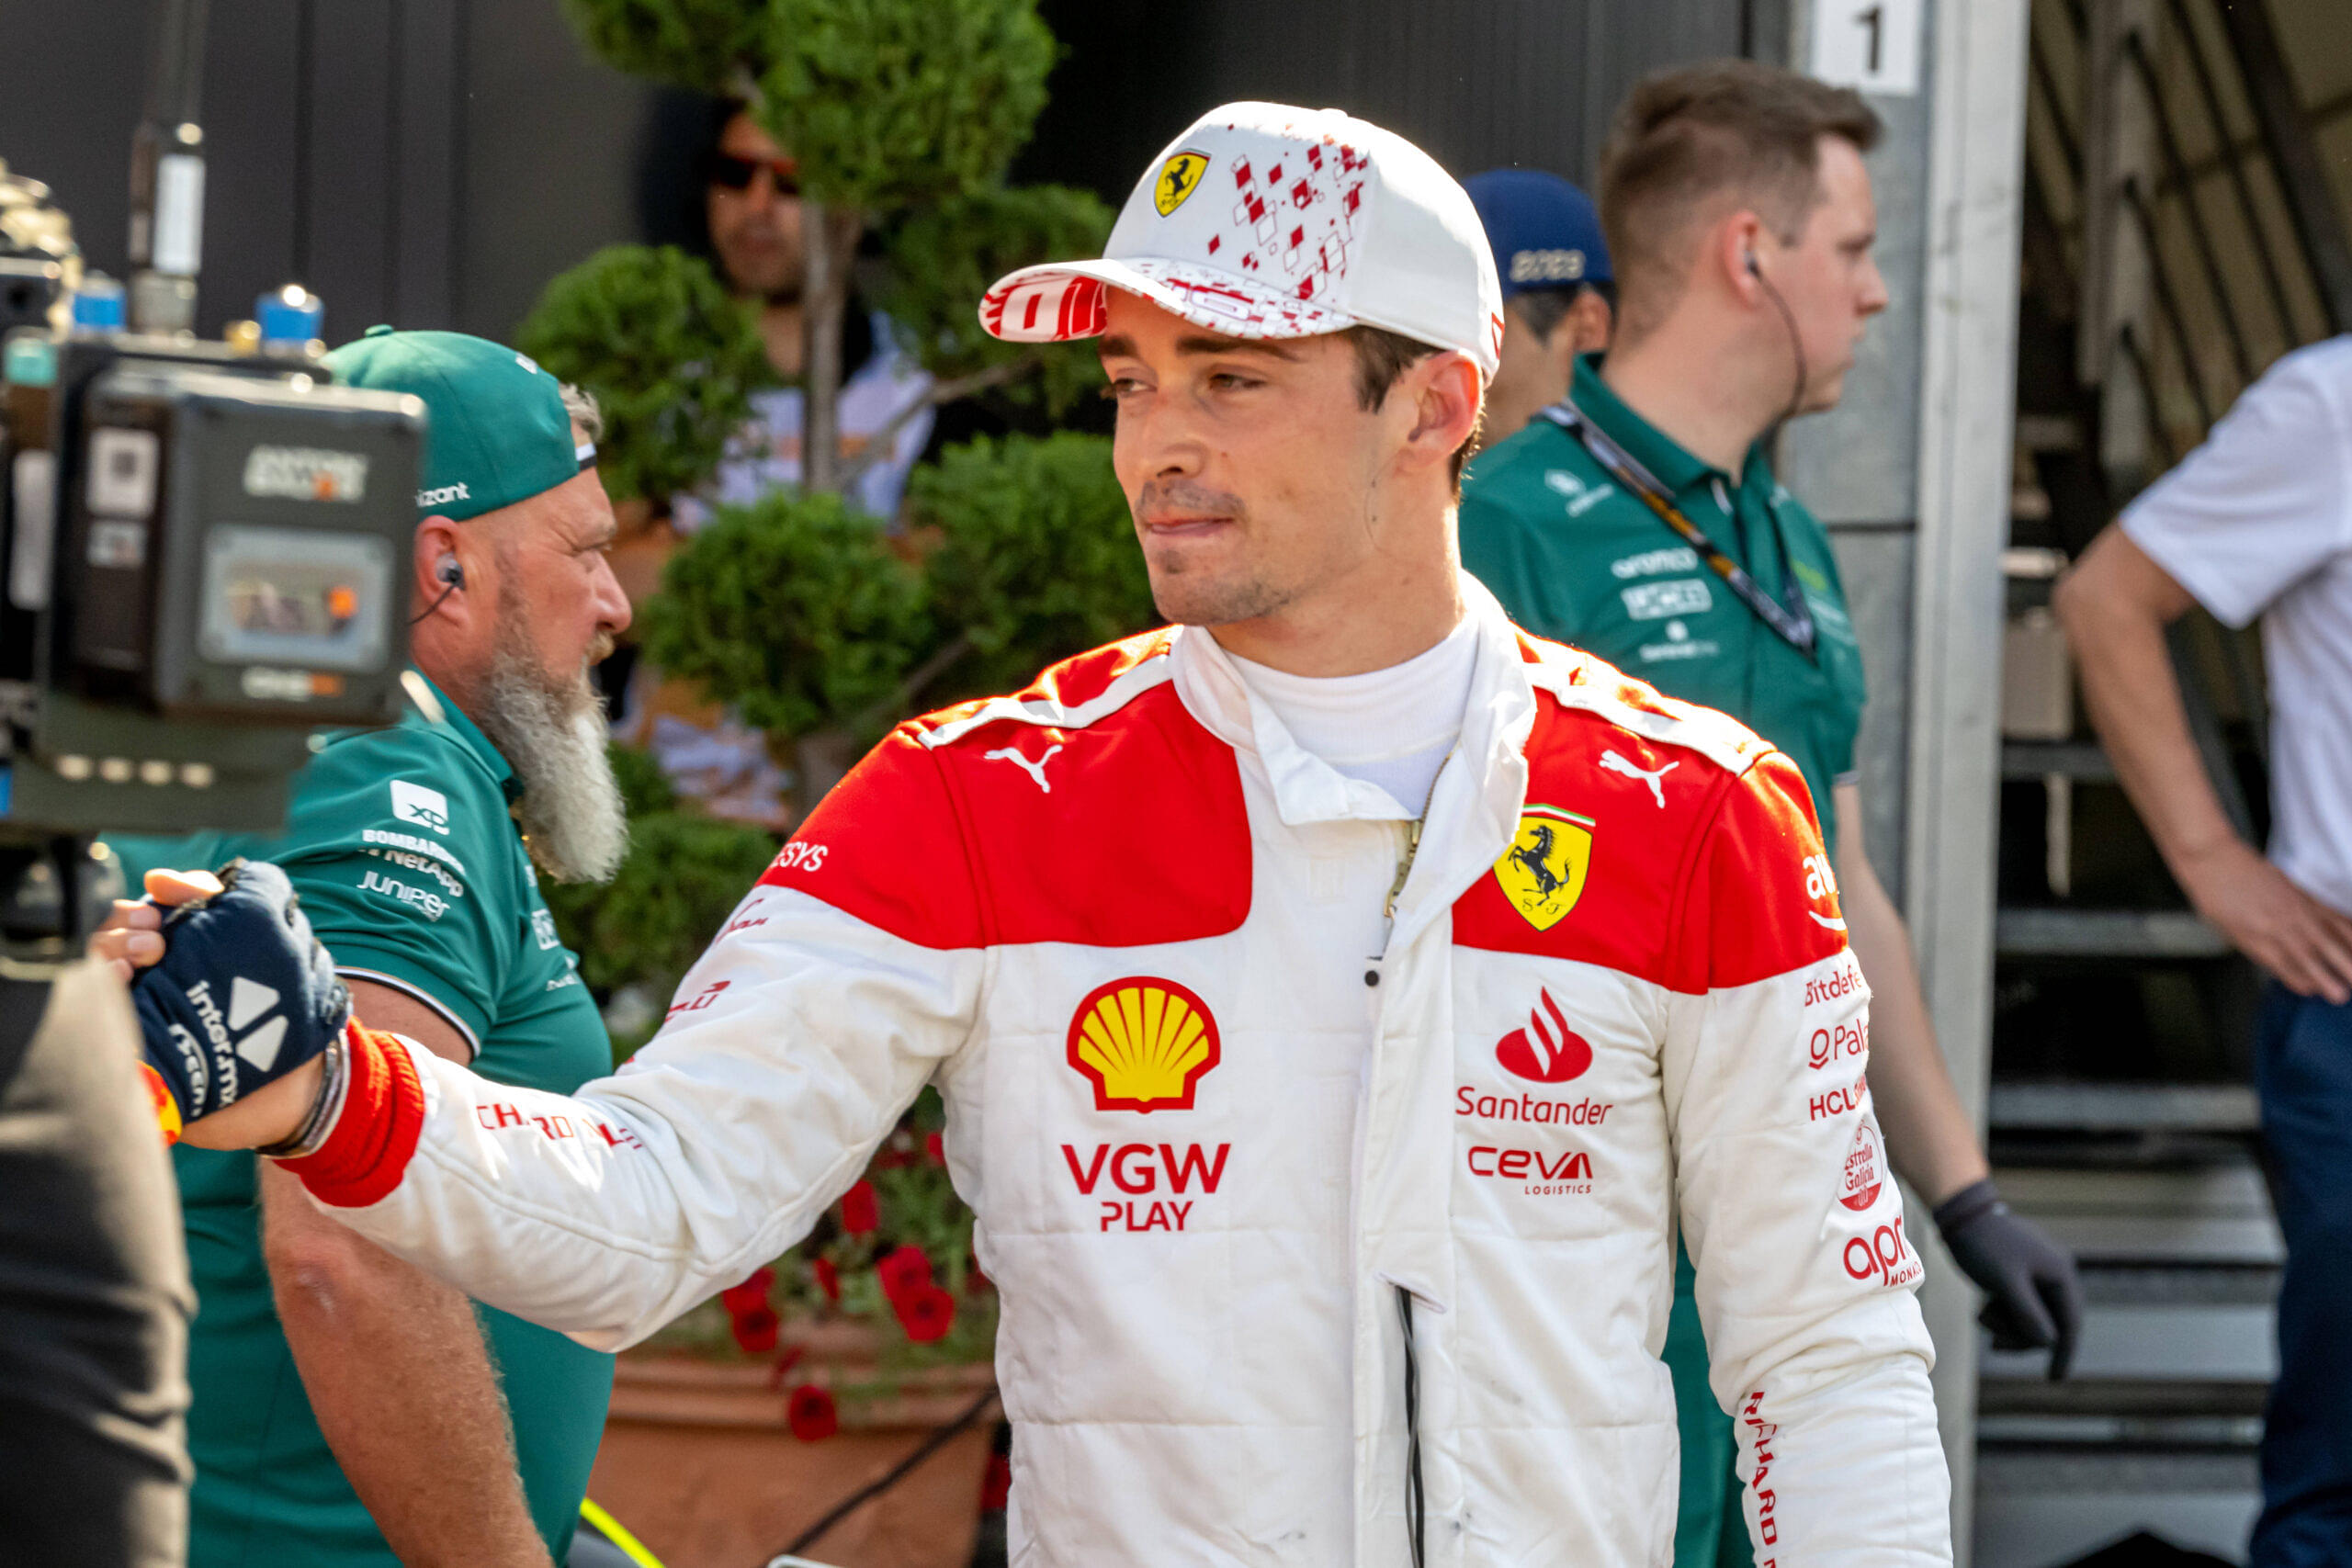 Hollywood Stardom Remains a Distant Dream for Charles Leclerc Amid Busy F1 Schedule